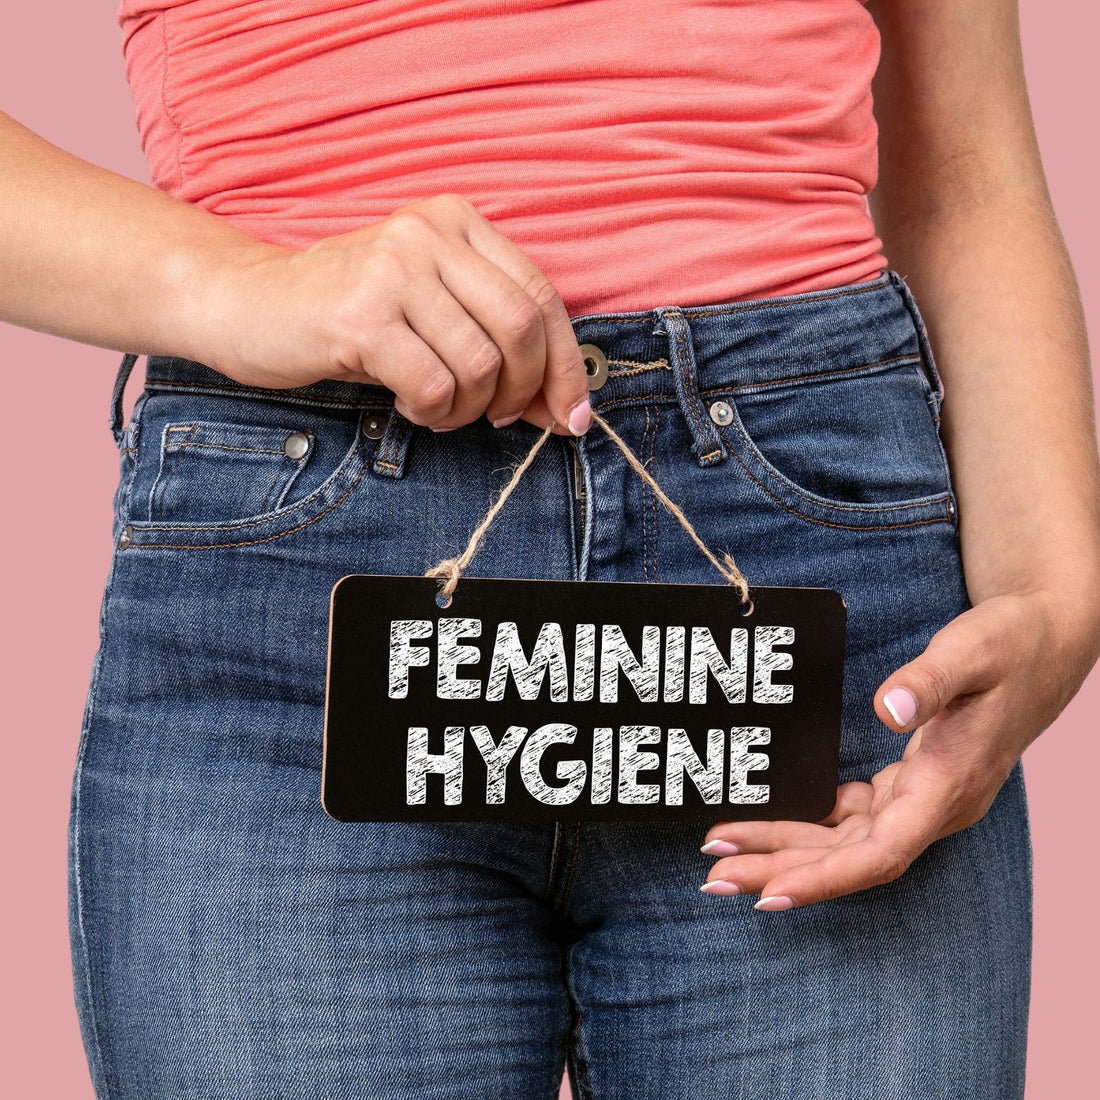 Feminine Hygiene Products: a History lesson!